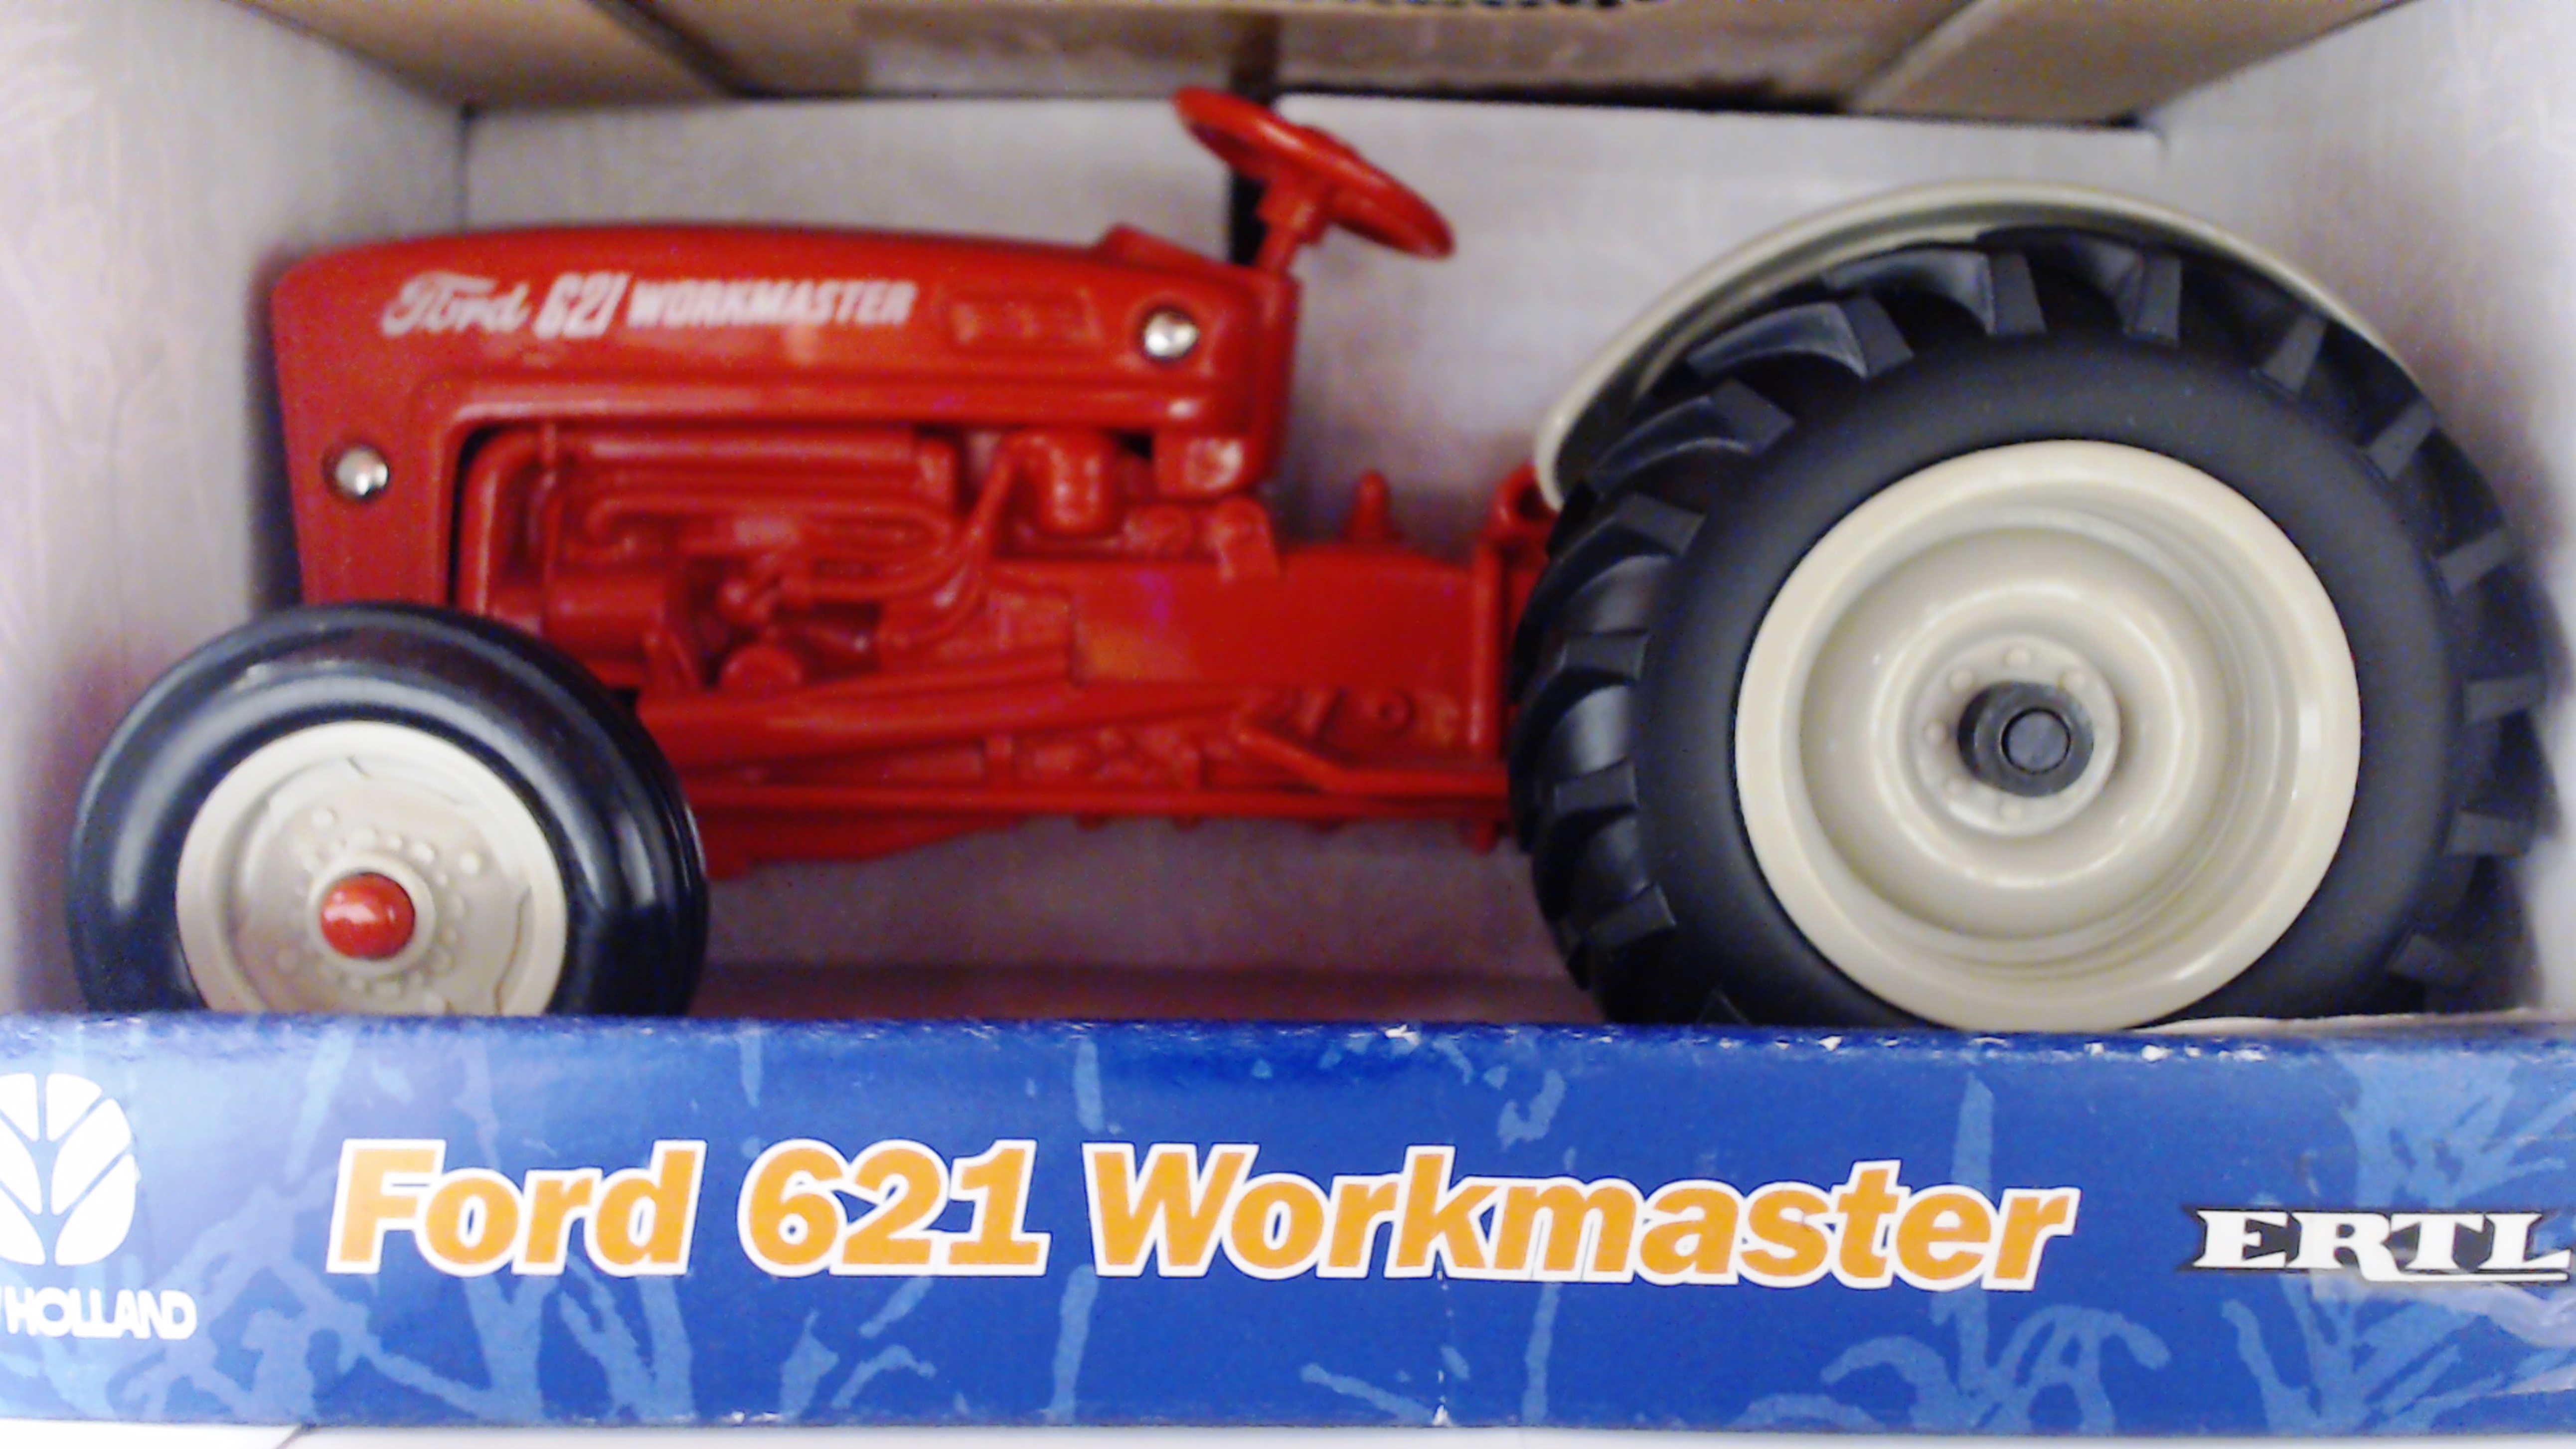 Ford 621 Workmaster | Down On The Farm